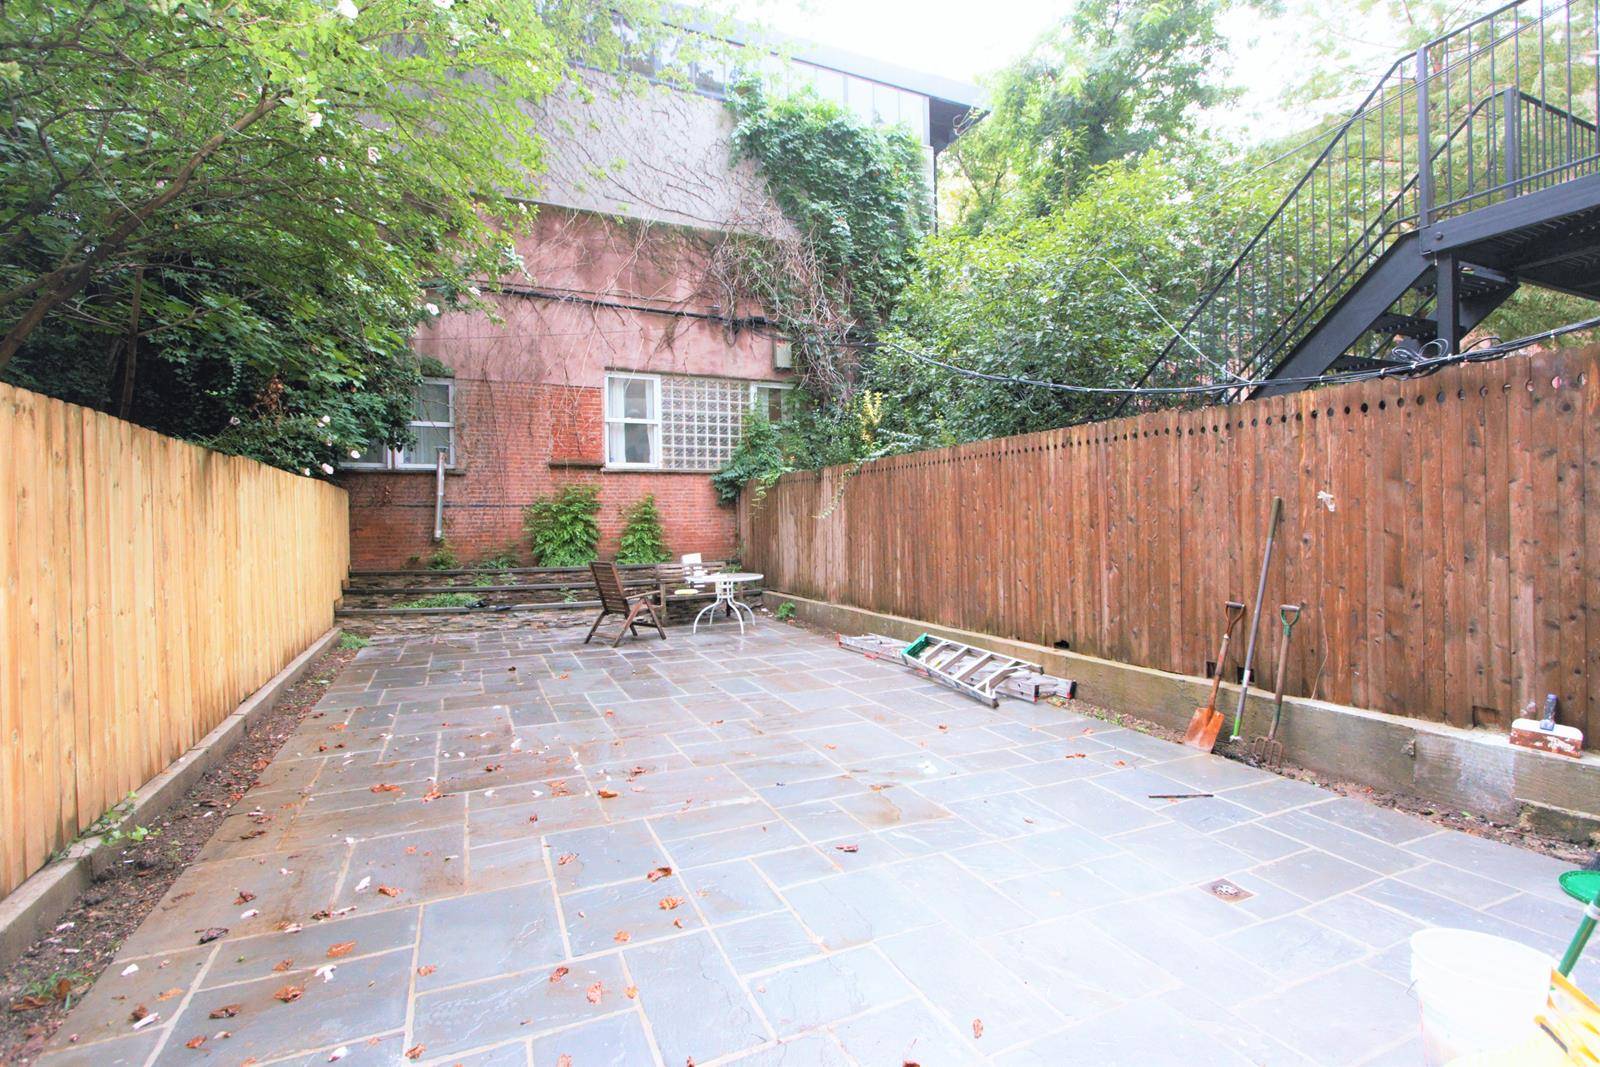 Prime Park Slope North Townhouse Garden Apartment Sensational 800 sf Private Outdoor Space serenely nestled amongst Brownstones and Quiet Leafy Streets near Barclays Center and Prospect Park.